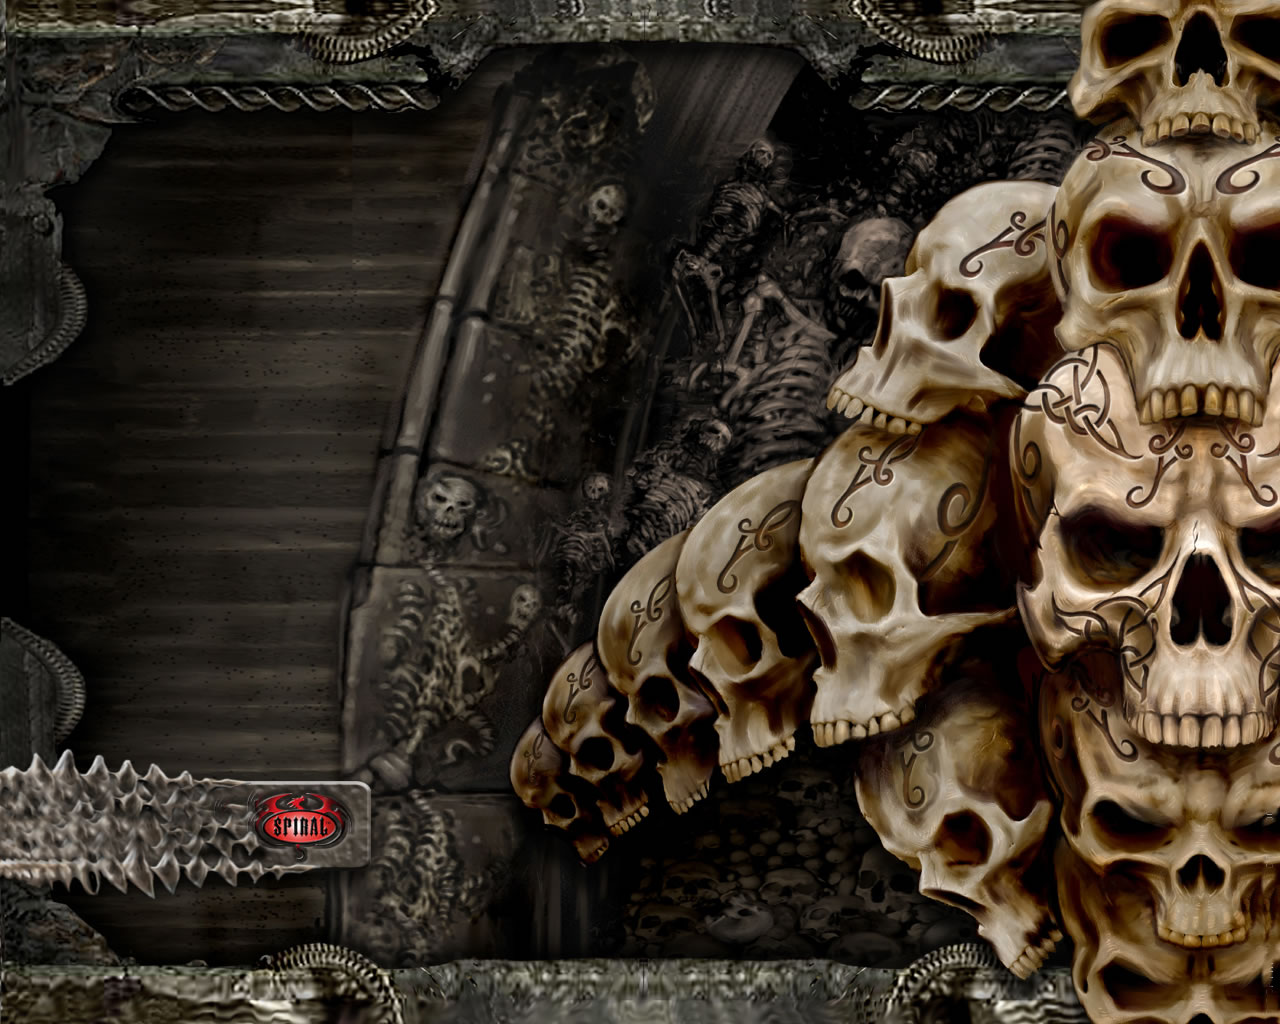  Skulls Art 3D Backgrounds on this Scary Wallpaper Backgrounds website